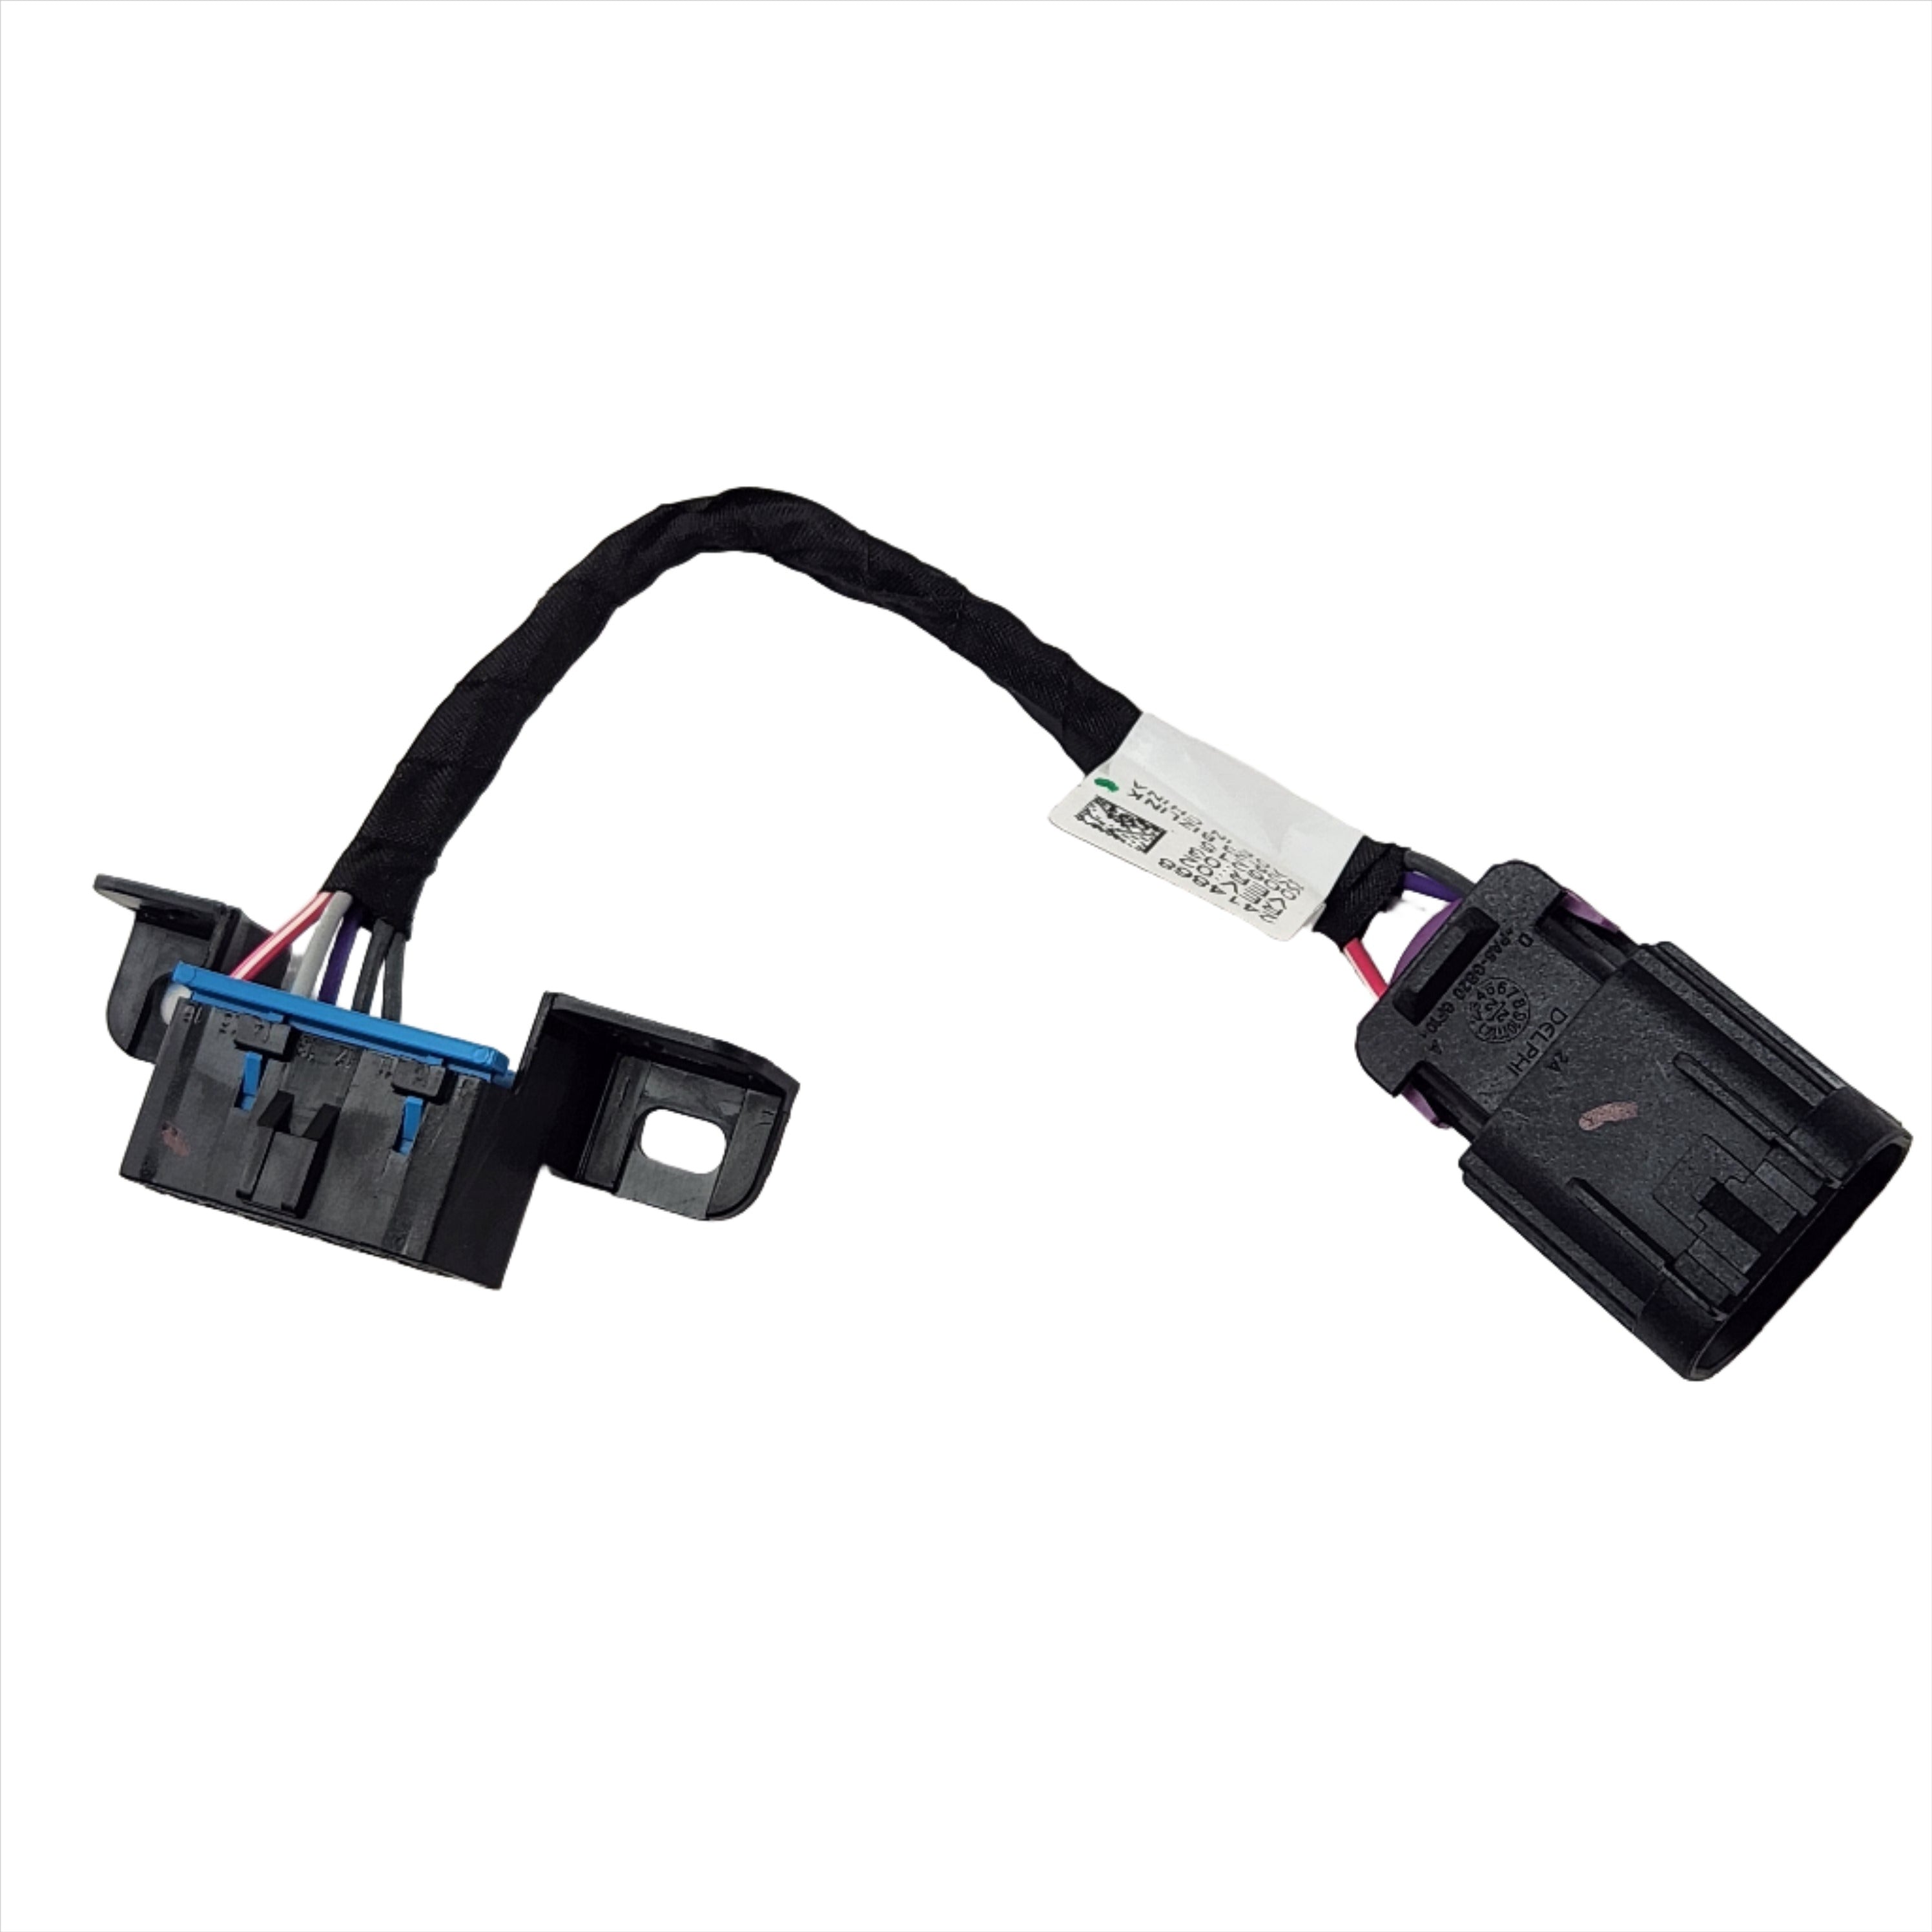 Off Road Express OEM Harness Harness-Adapter Obd by Polaris 2414868